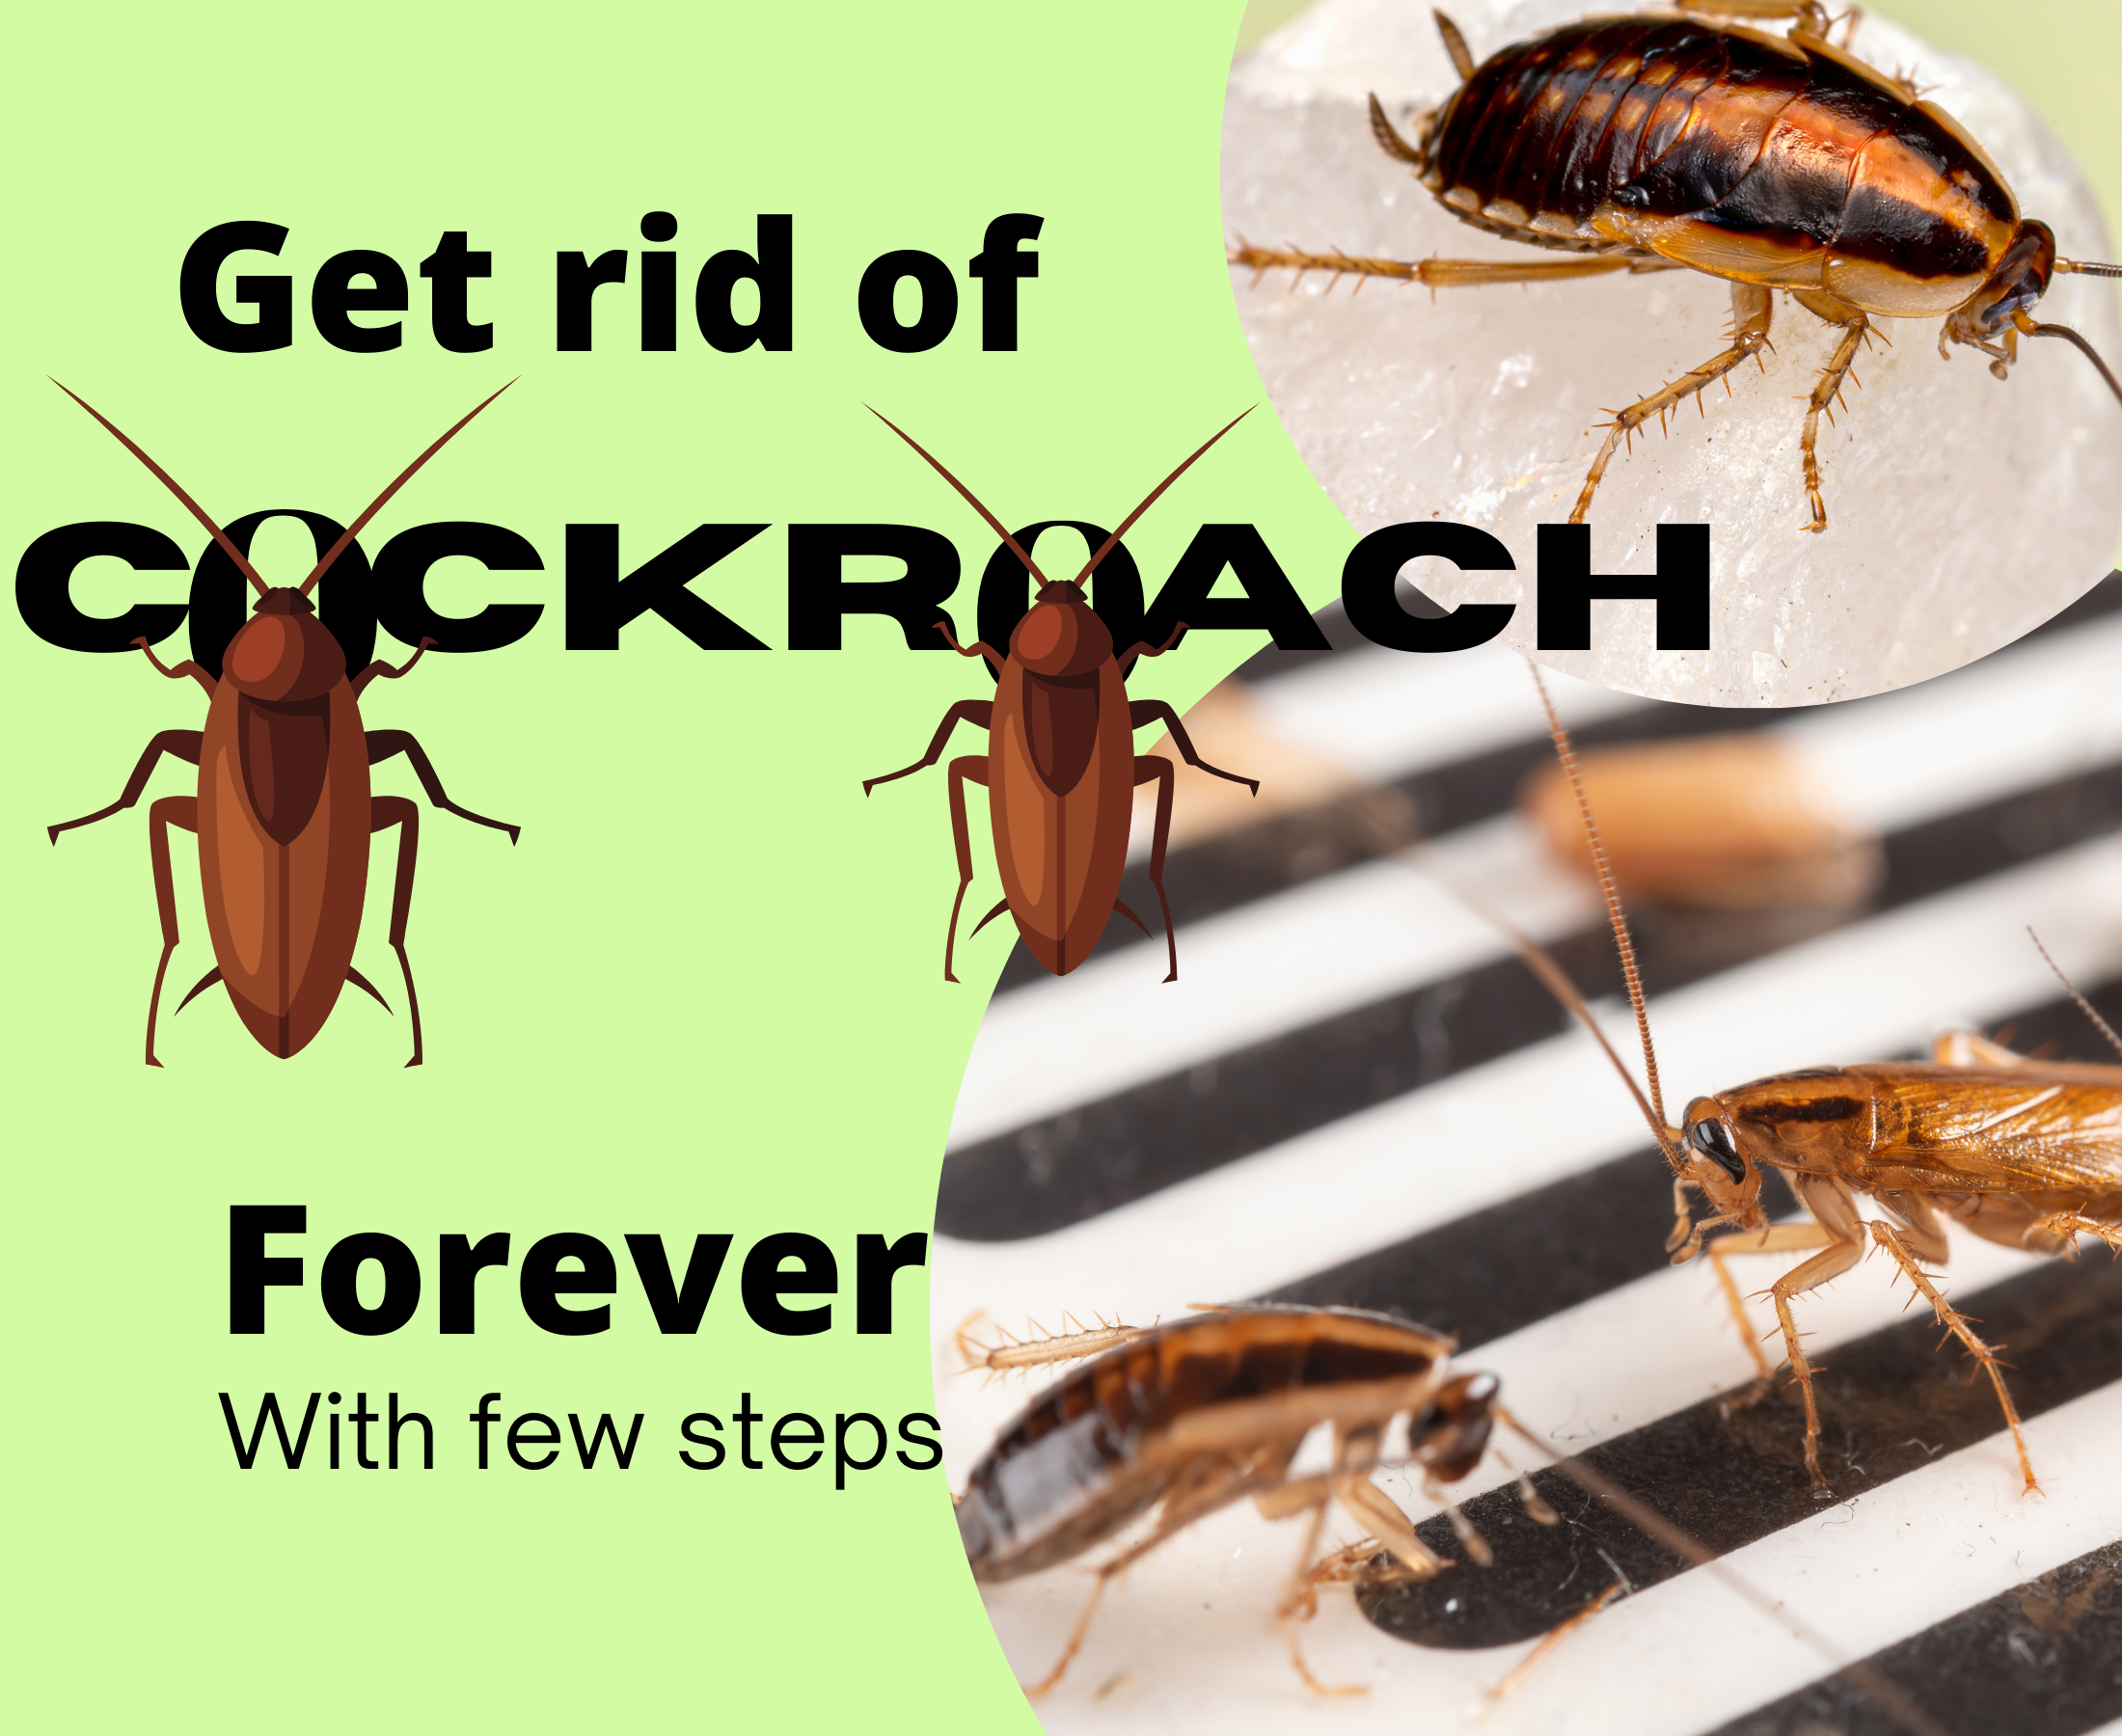 How to get rid of cockroach breading or cockroach forever?